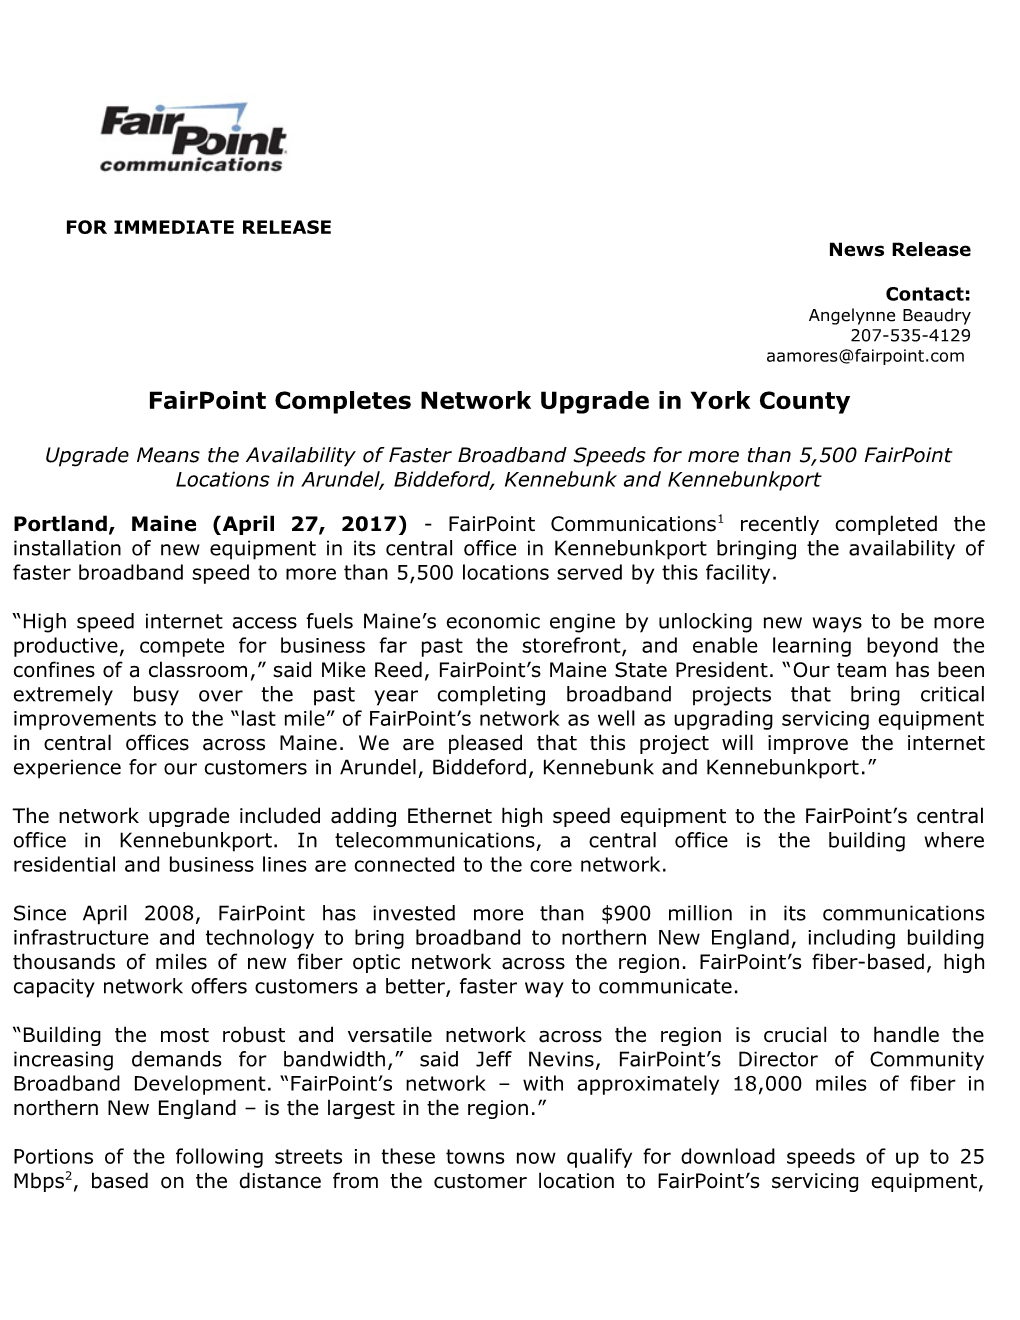 Fairpoint Completes Network Upgrade in York County